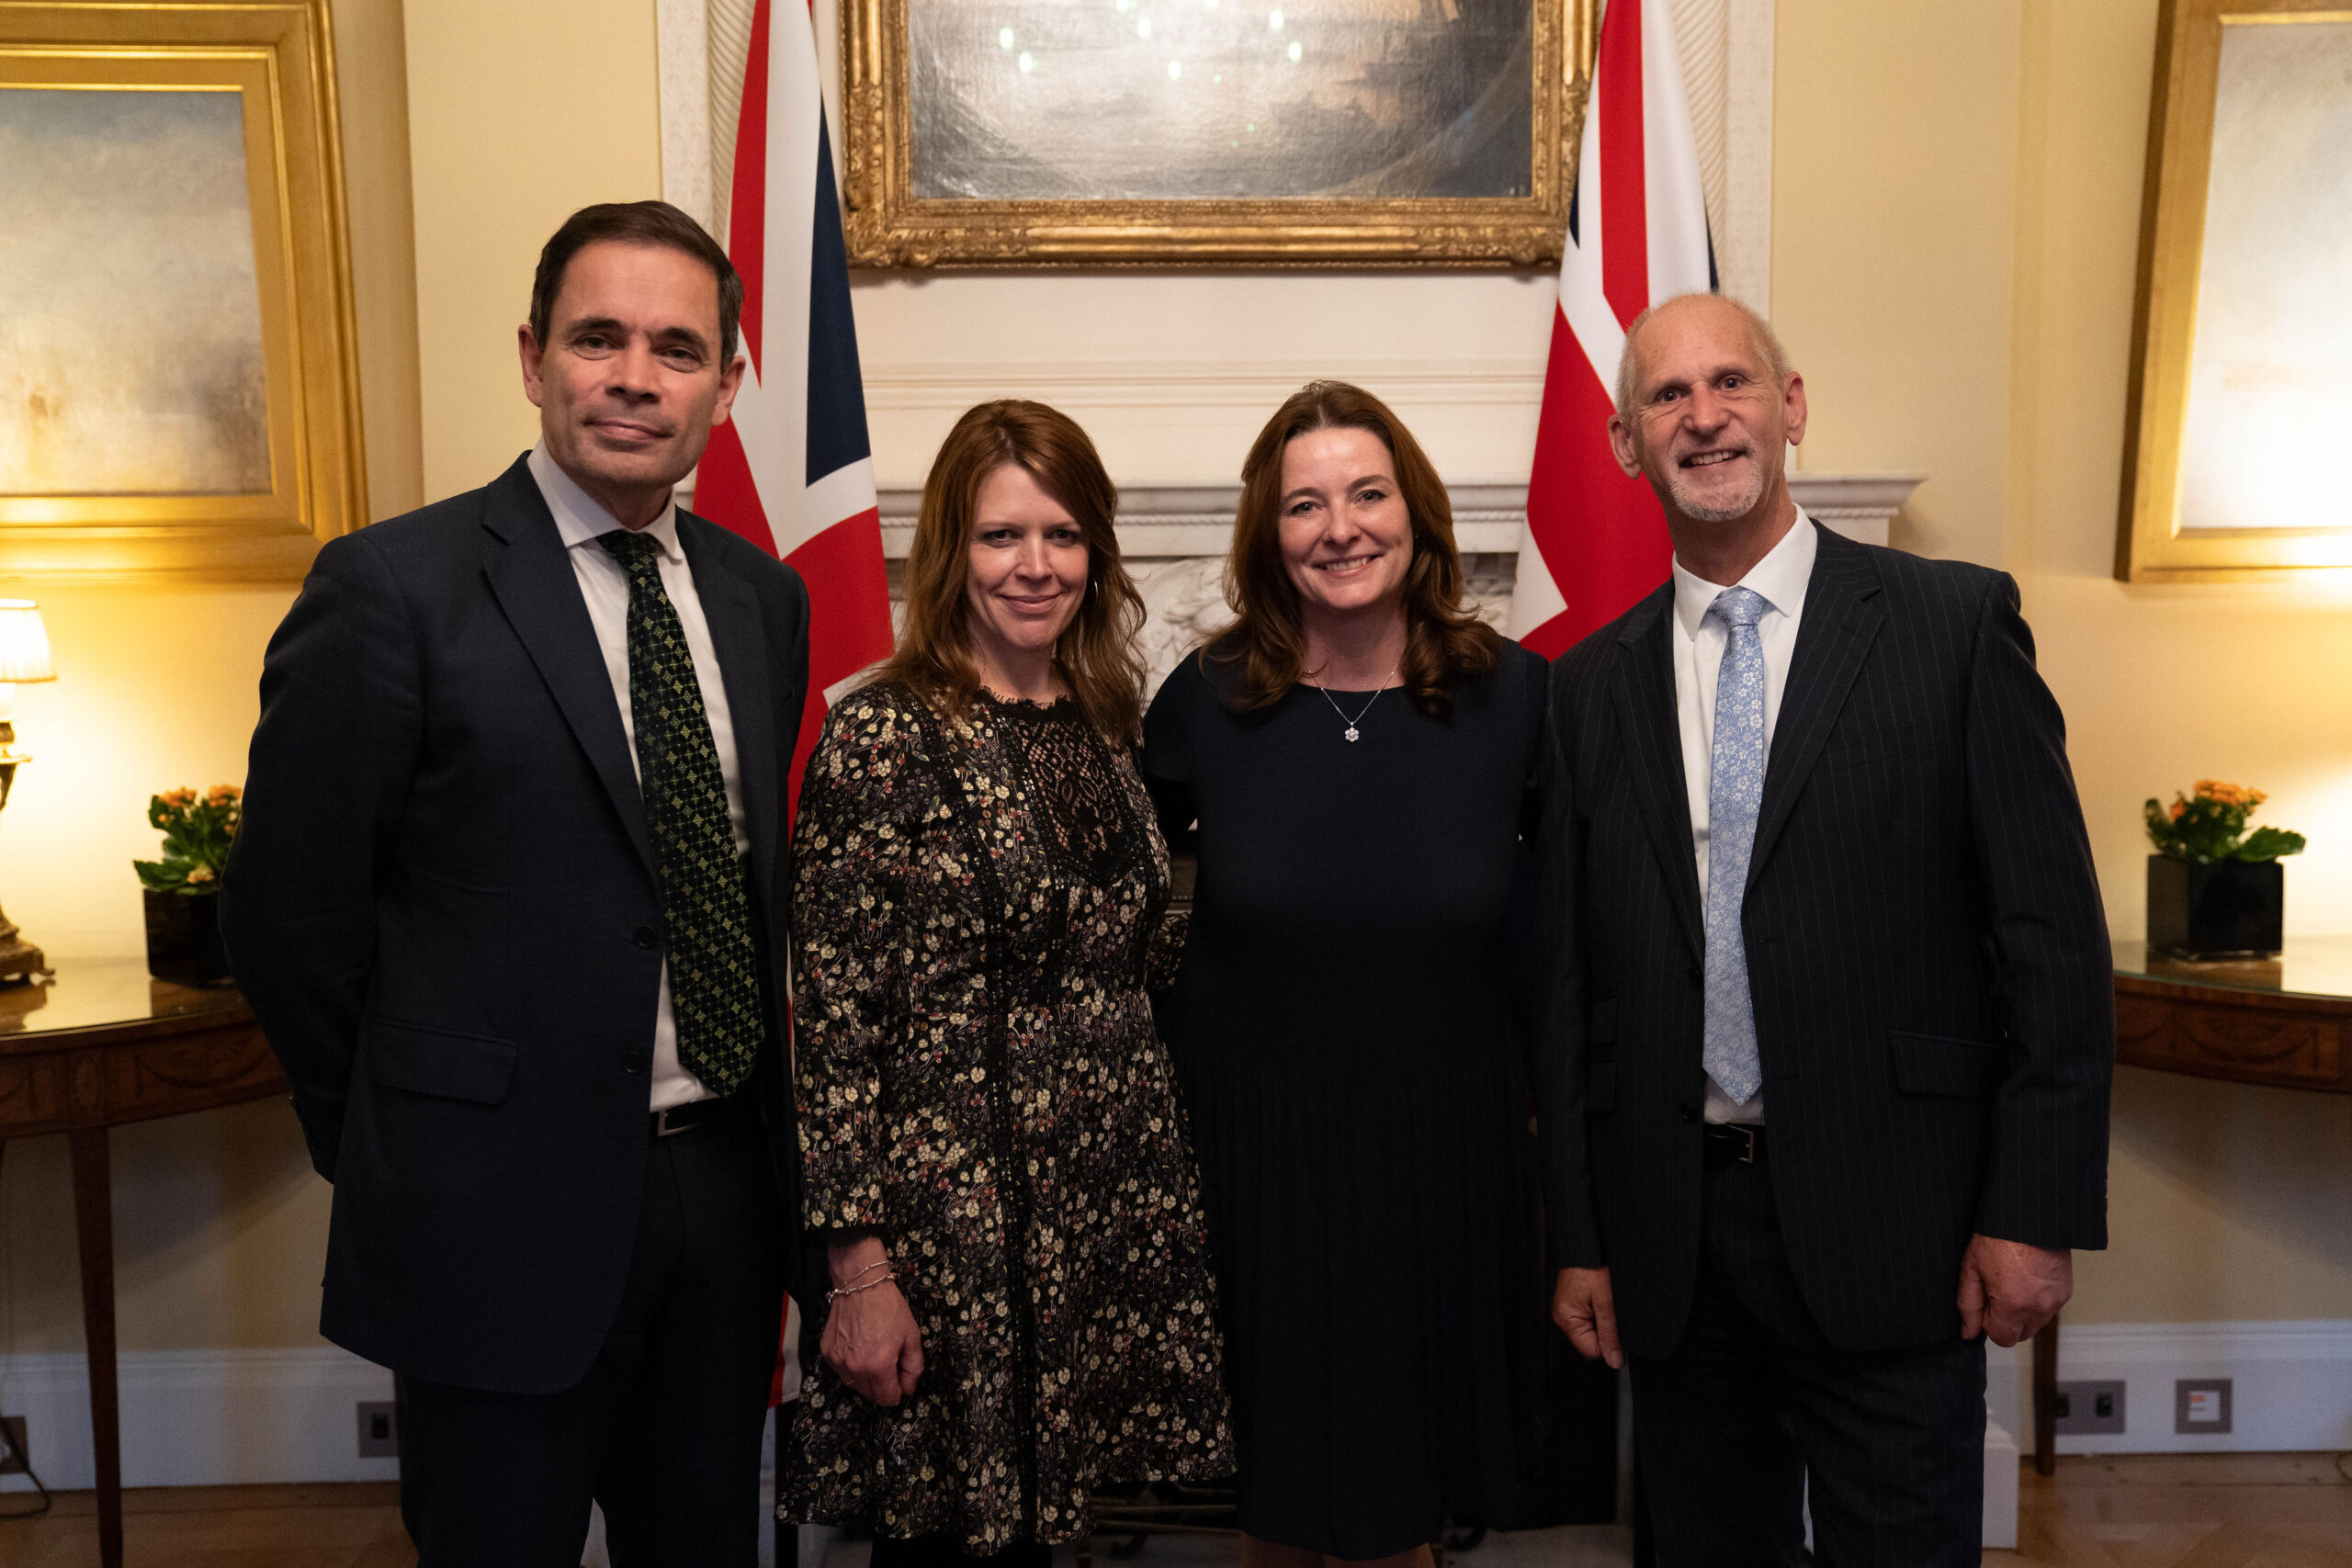 “Inspirational” social housing pioneers honoured at 10 Downing Street reception